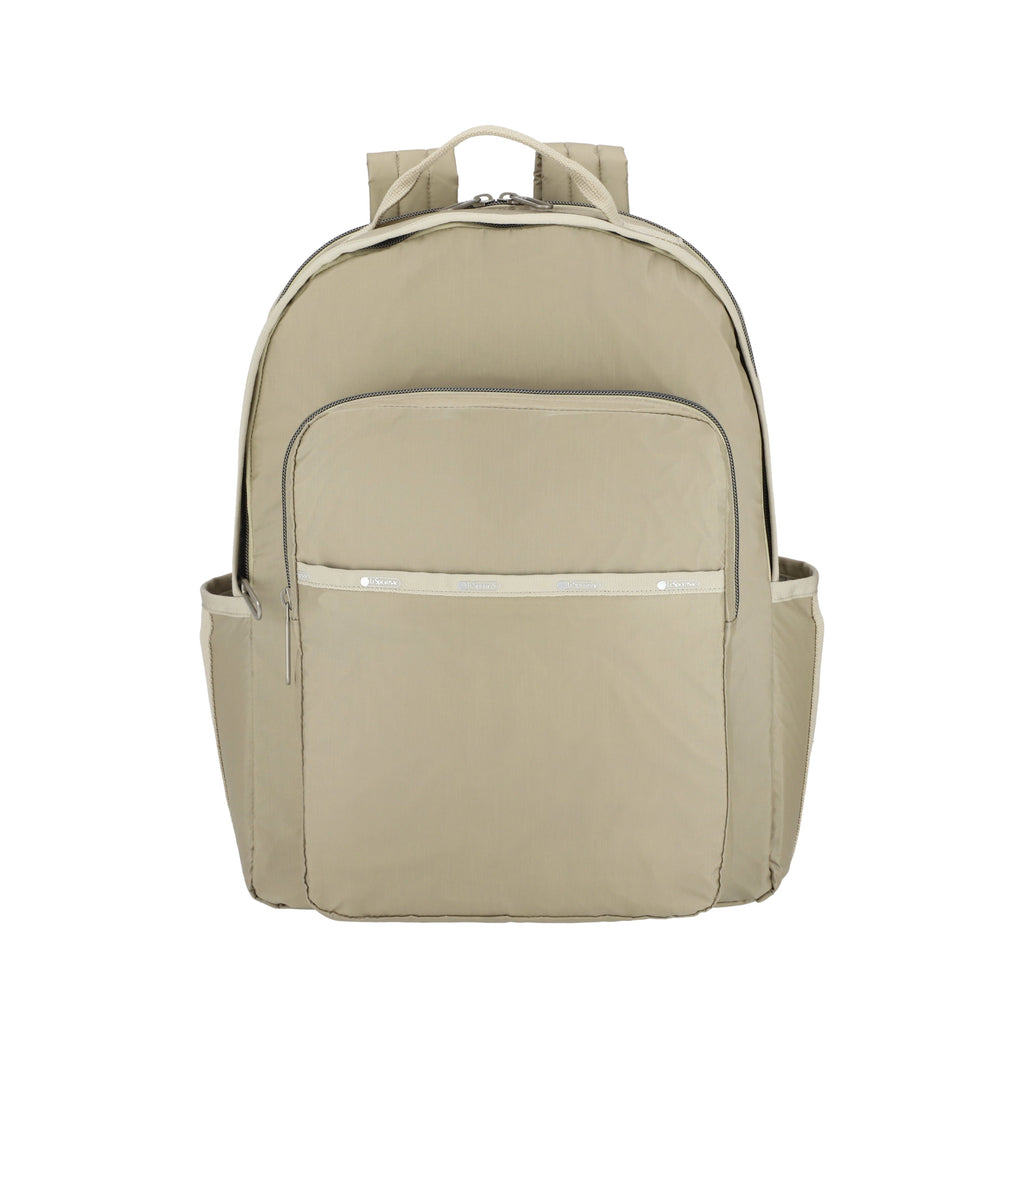 Essential Carryall Backpack - 25311523569712